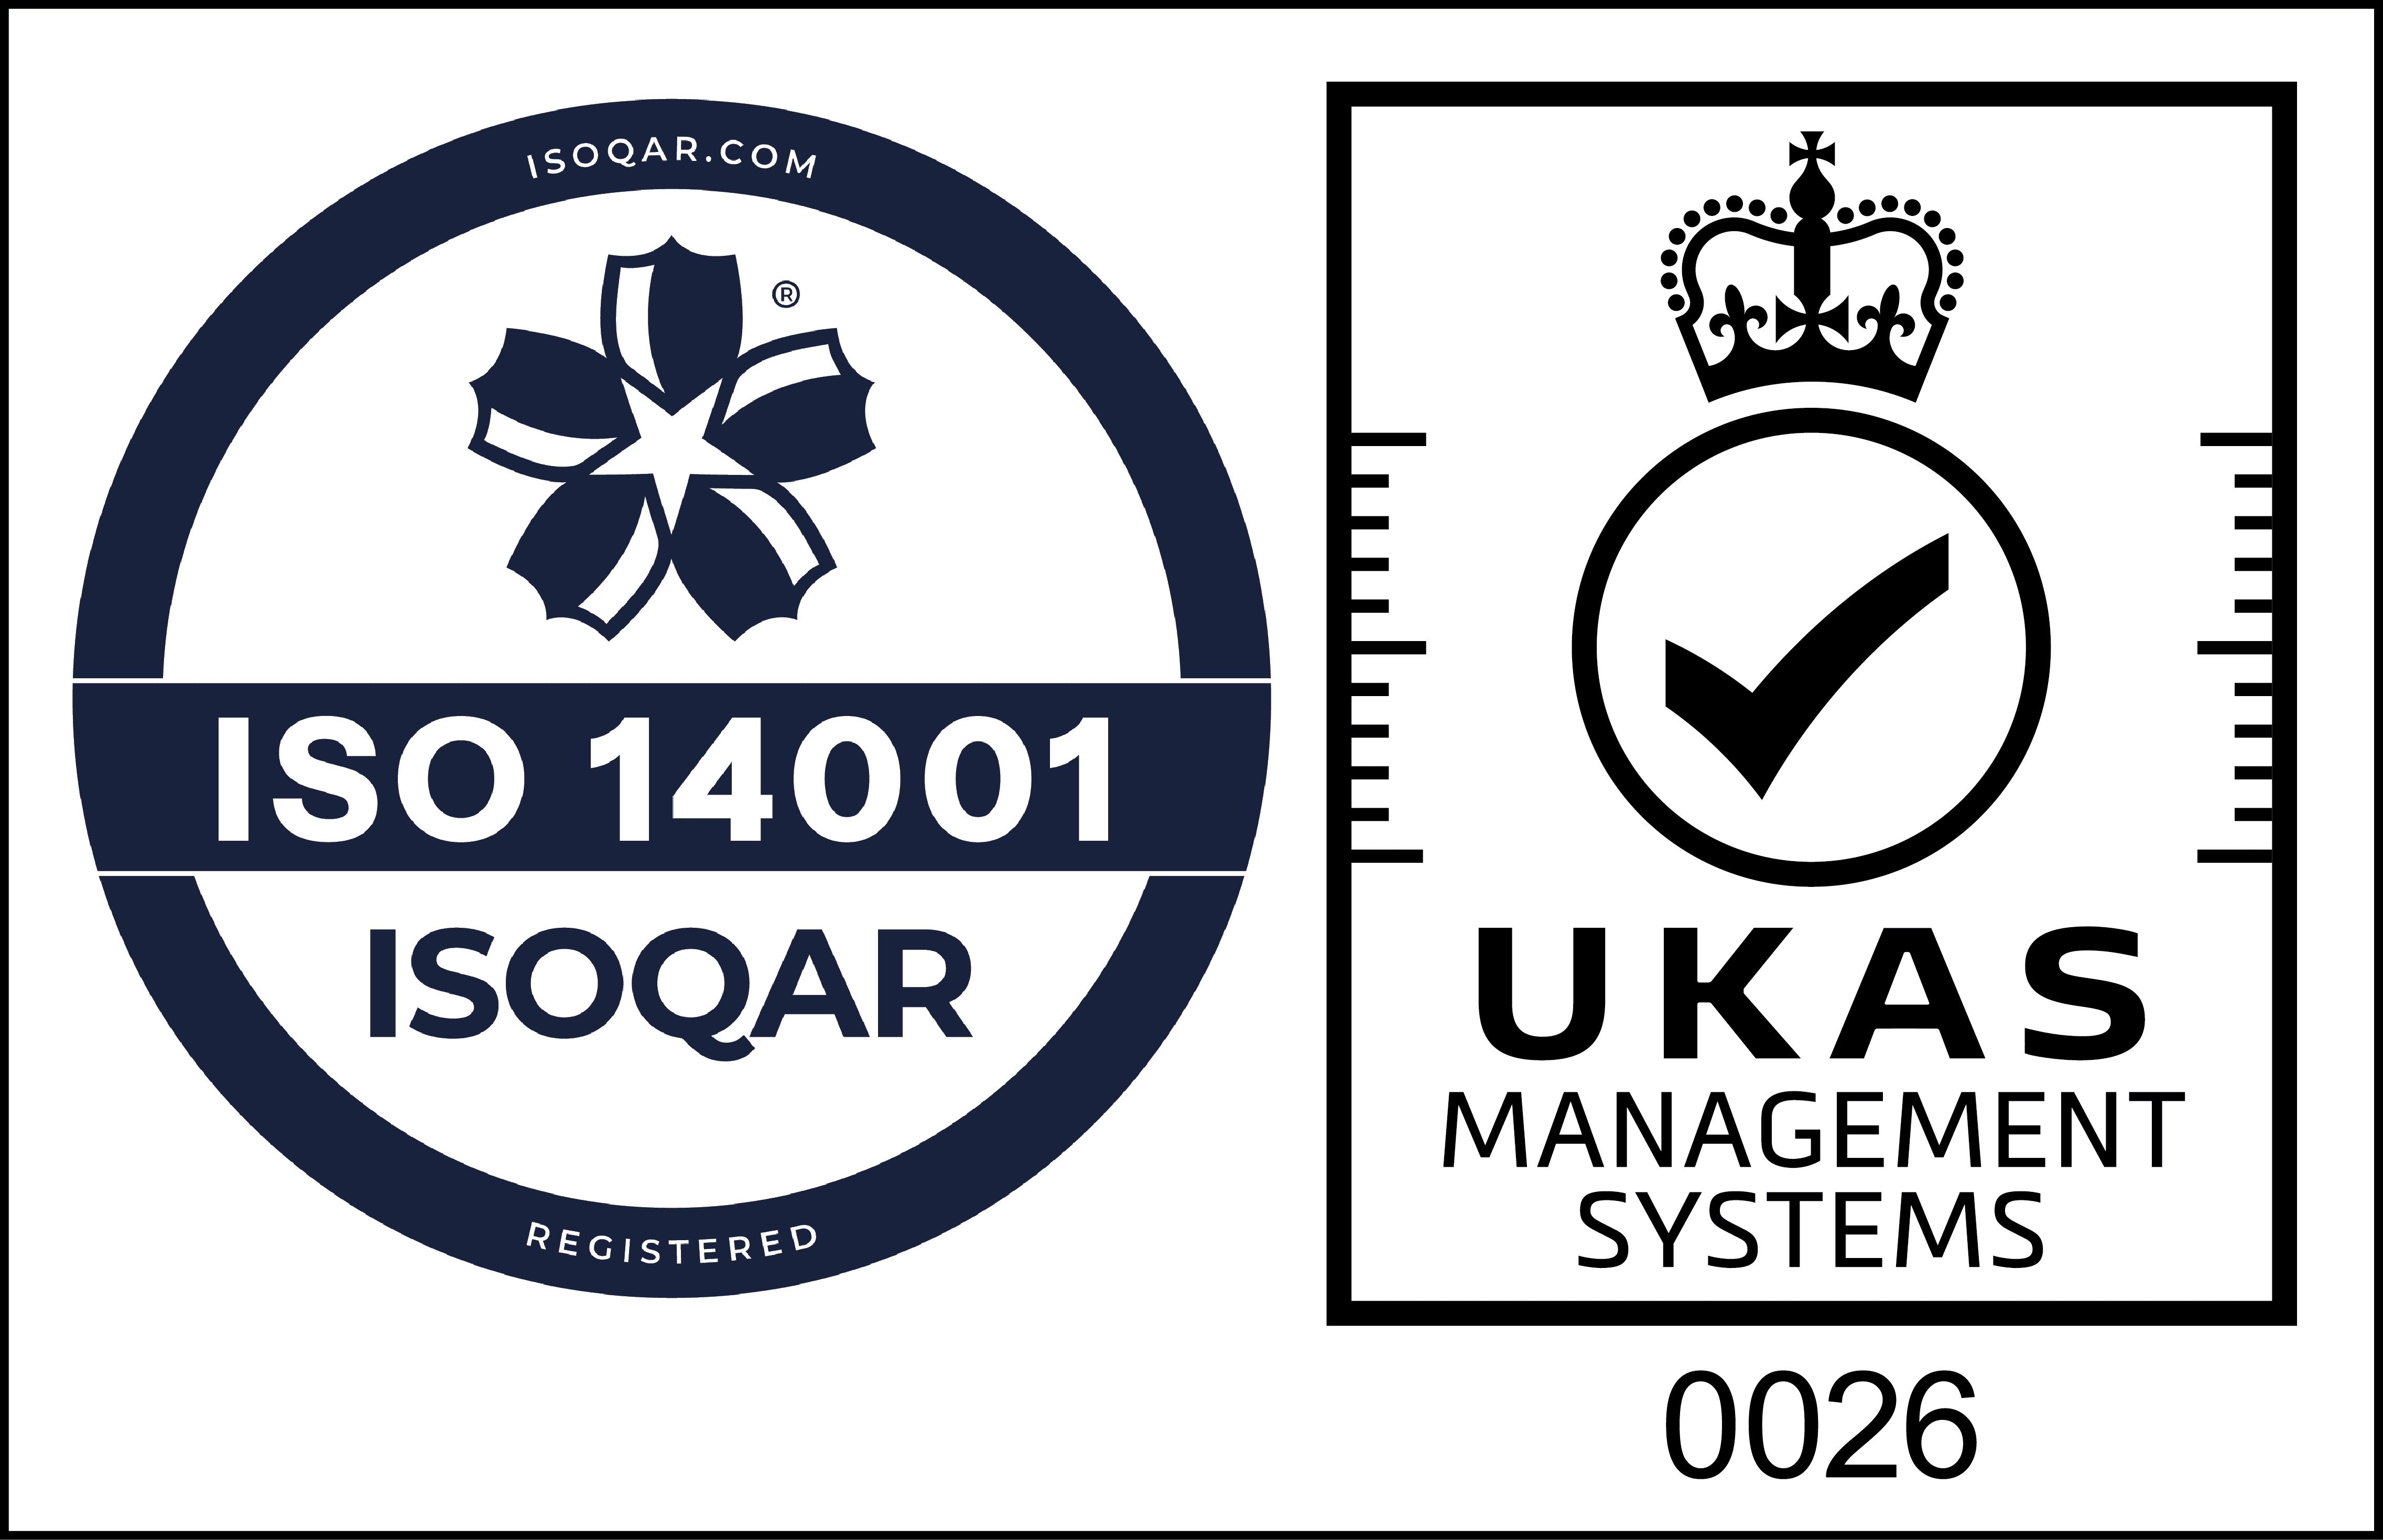 UKAS ISO Joint Logos - 14001